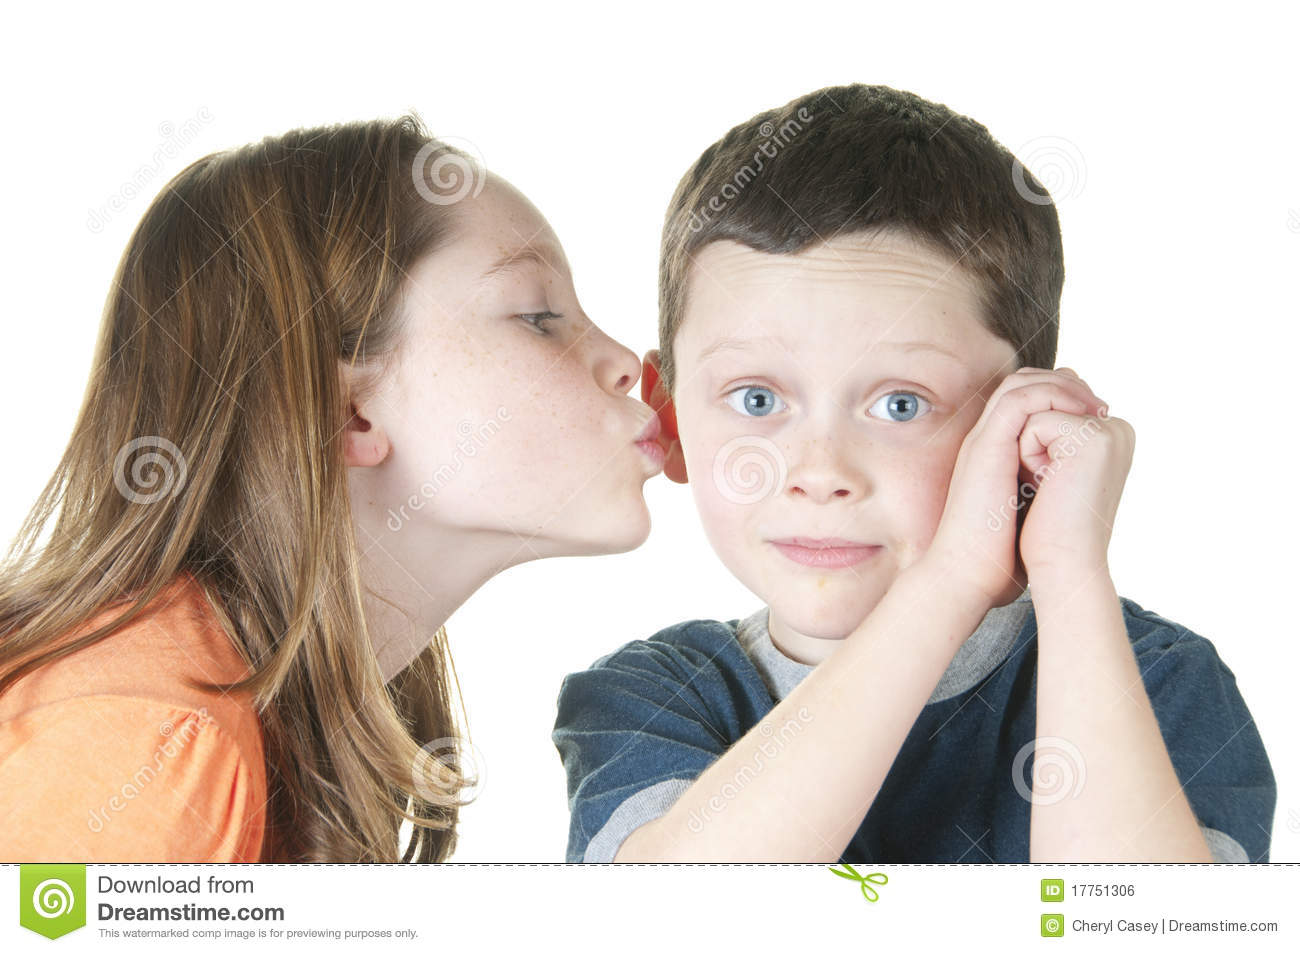 young girl kissing old man clipart - Clipground